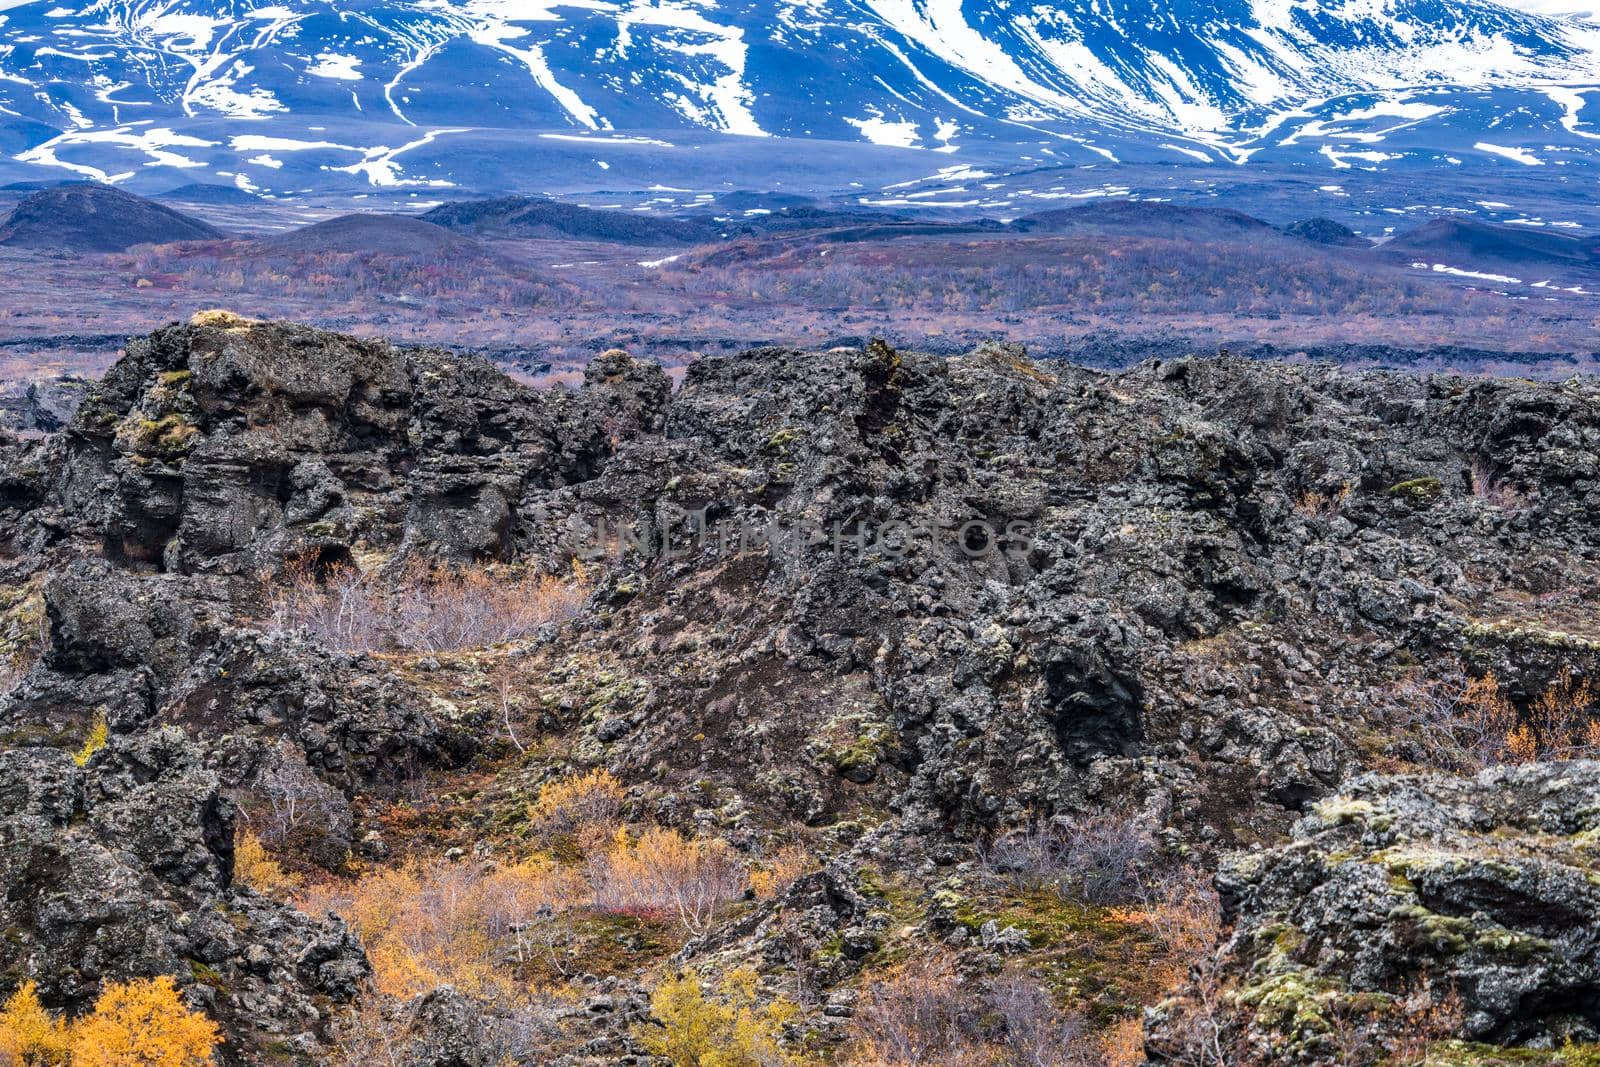 Vast lava field with snow covered mountains in the background by FerradalFCG